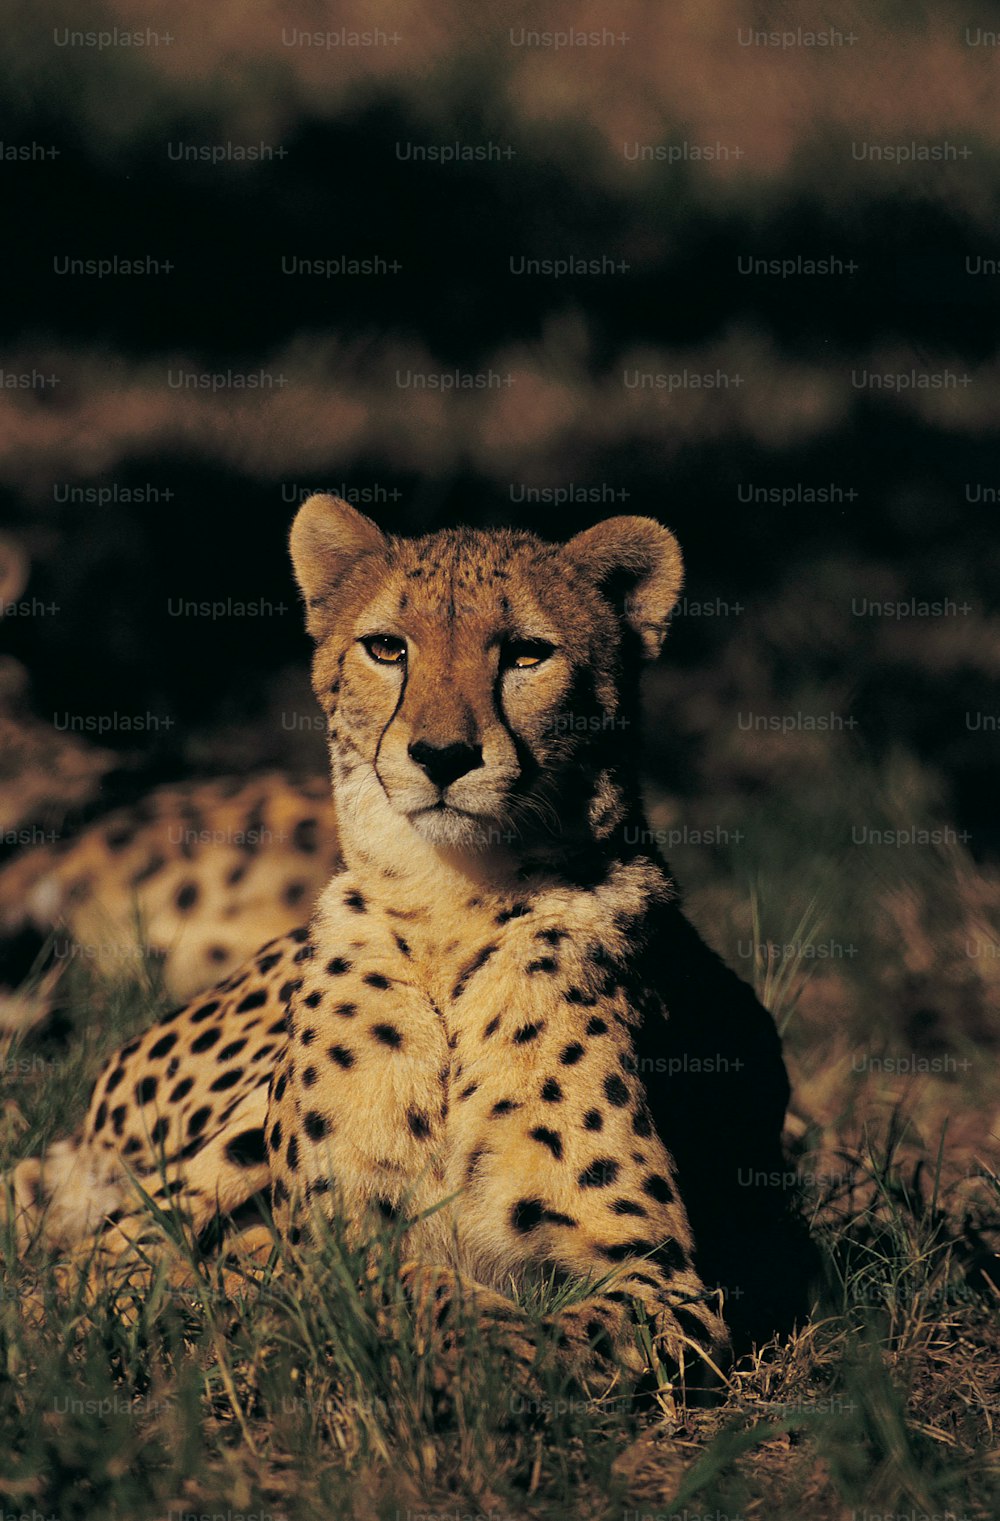 a cheetah sitting in the grass looking at the camera